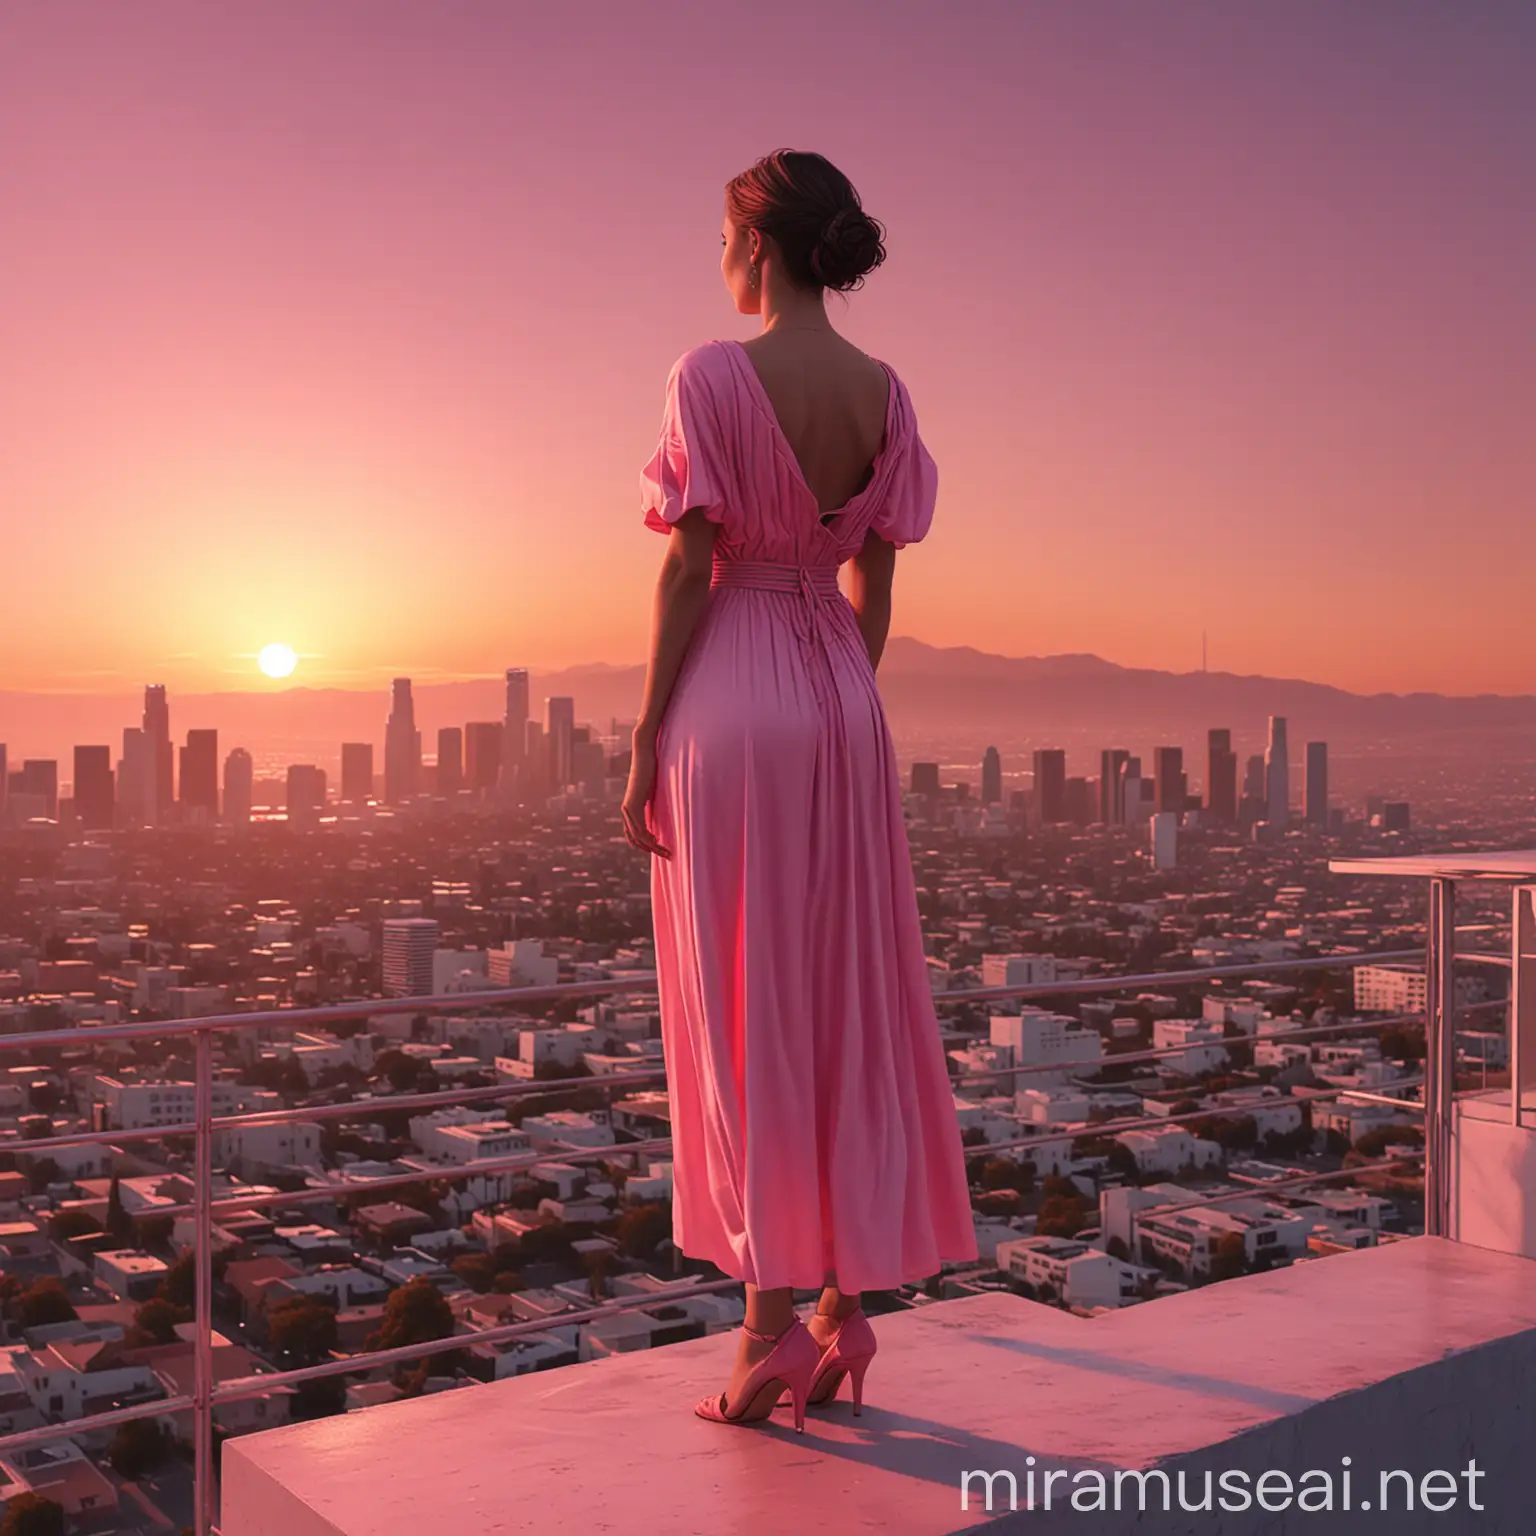 3D 8k mininal realstic illustrator mininal woman standing on the top of the building in los Angeles watching stunning hyper realstic sunset with her light hypre dress bold pink color